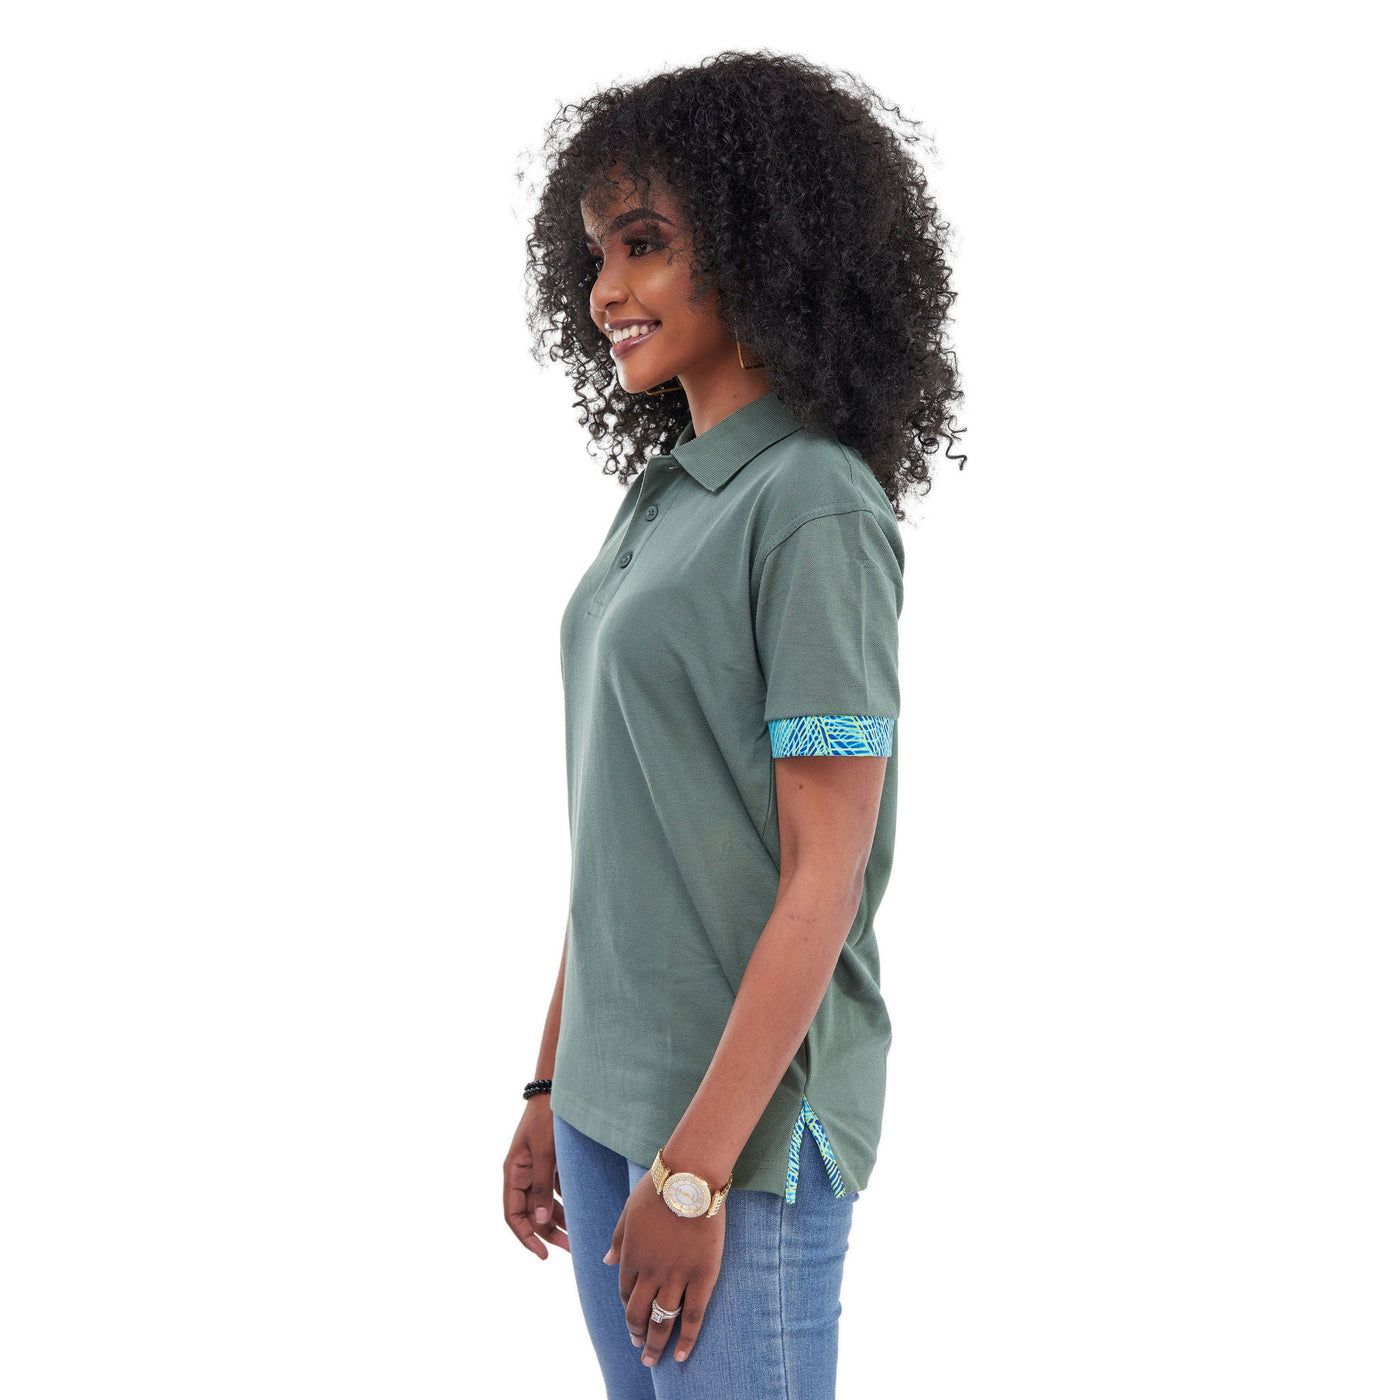 Kali Polos: Jungle Green with Mtende